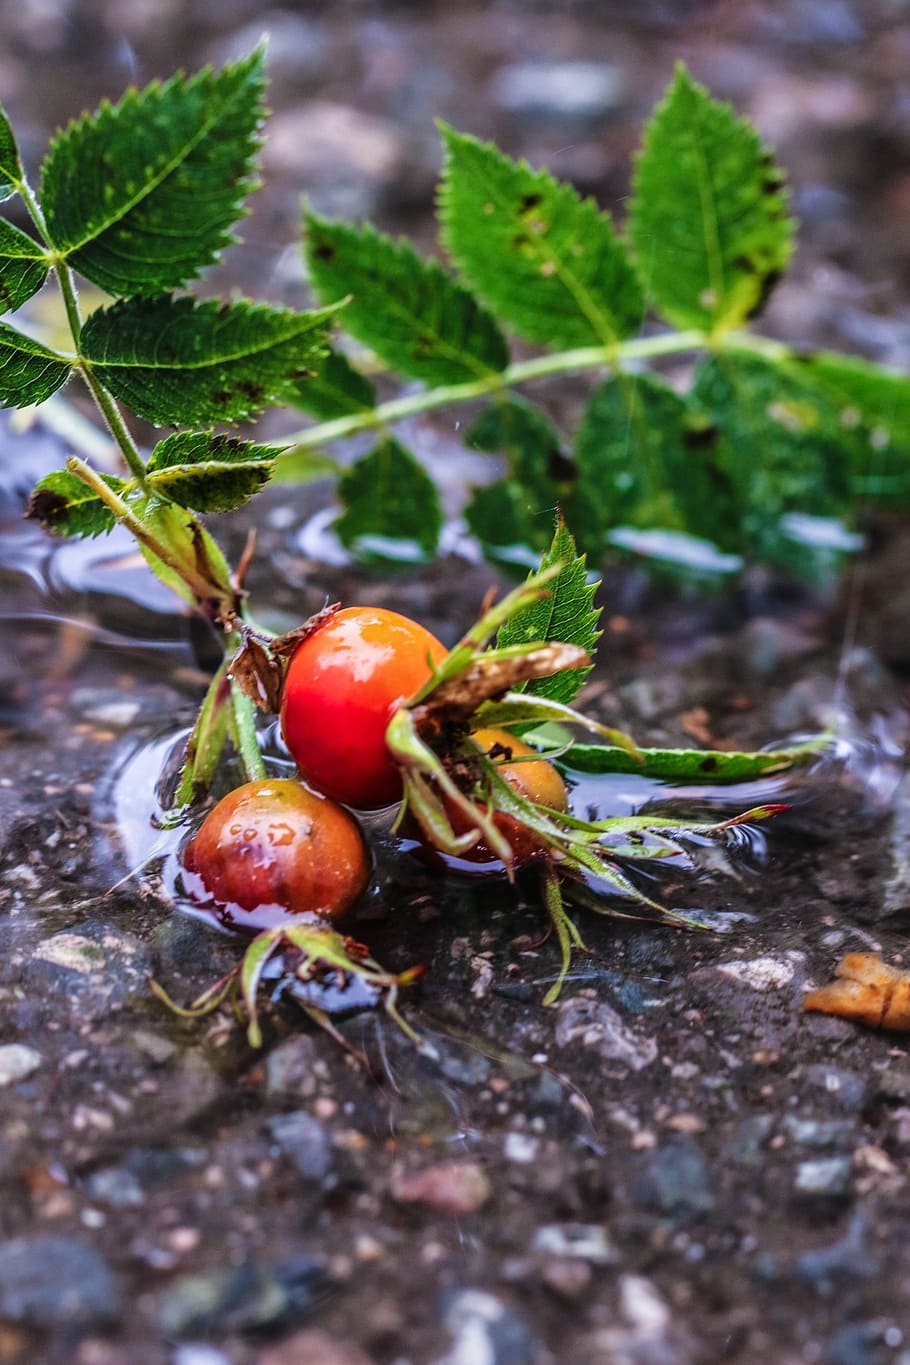 rose-hip, herb, plant, puddle, water, rain, food, food and drink, leaf, plant part